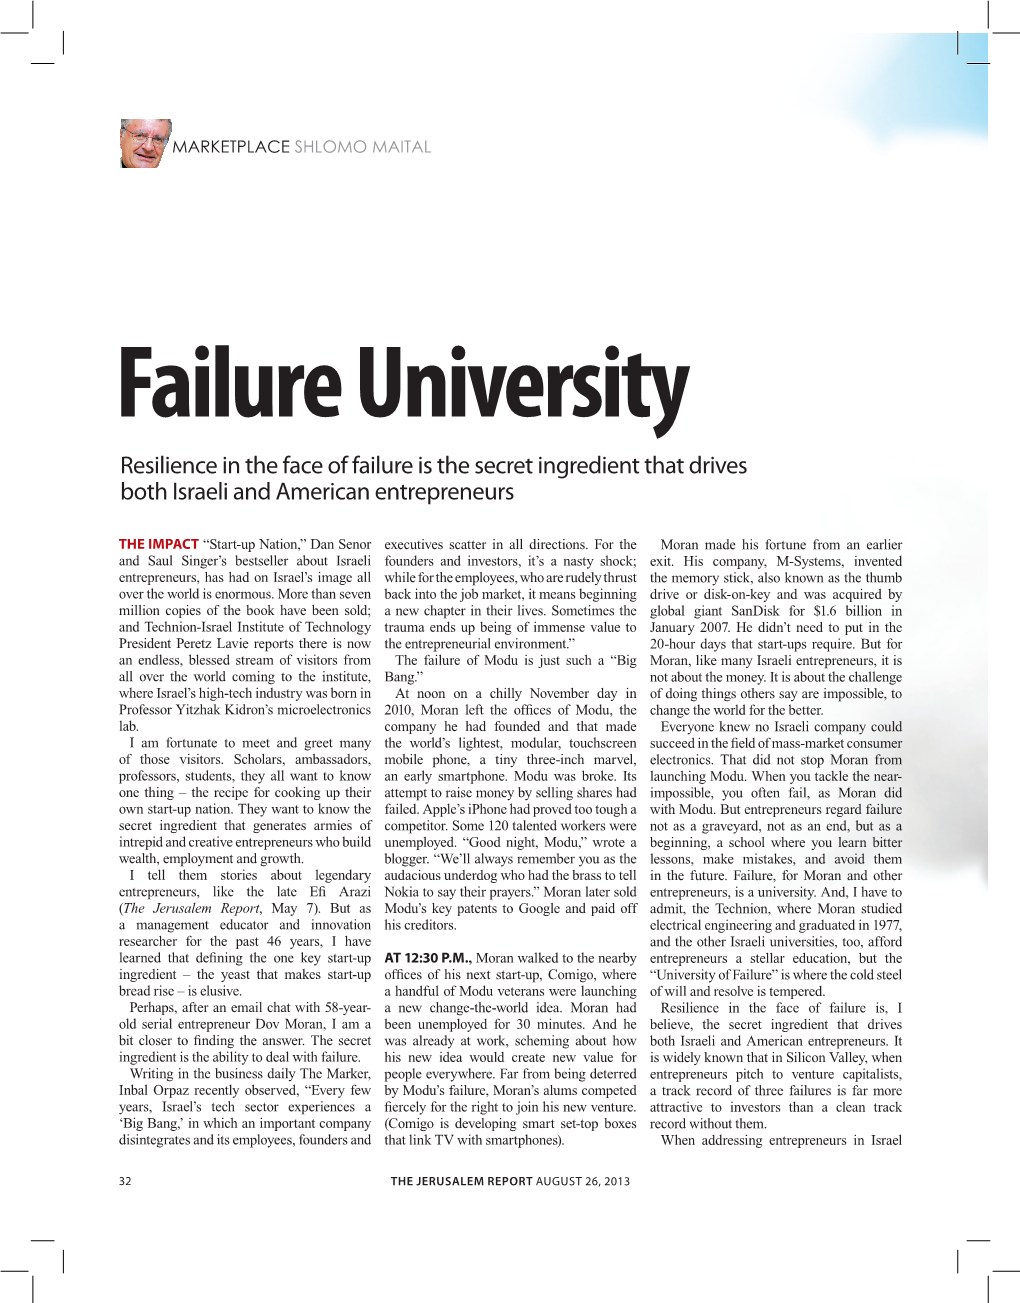 Failure University Resilience in the Face of Failure Is the Secret Ingredient That Drives Both Israeli and American Entrepreneurs